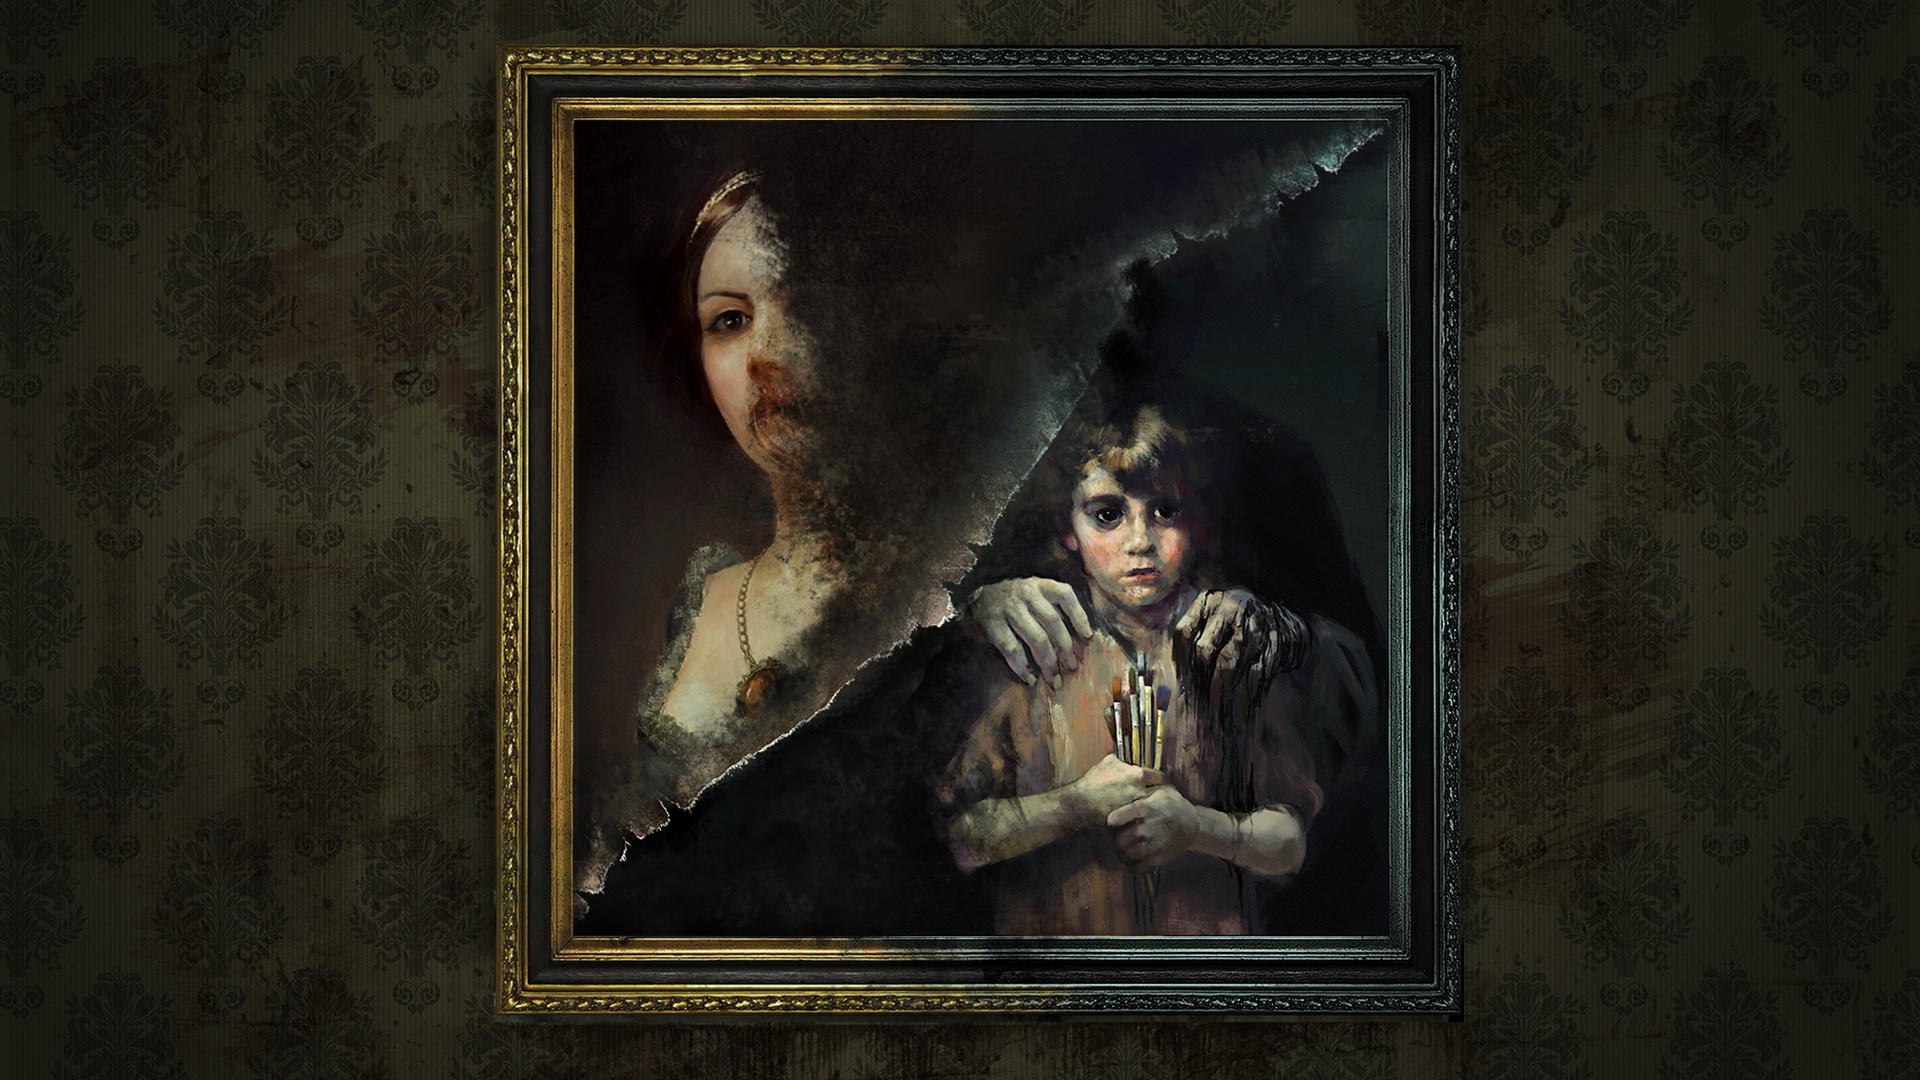 Layers of Fear 2 PC Game - Free Download Full Version